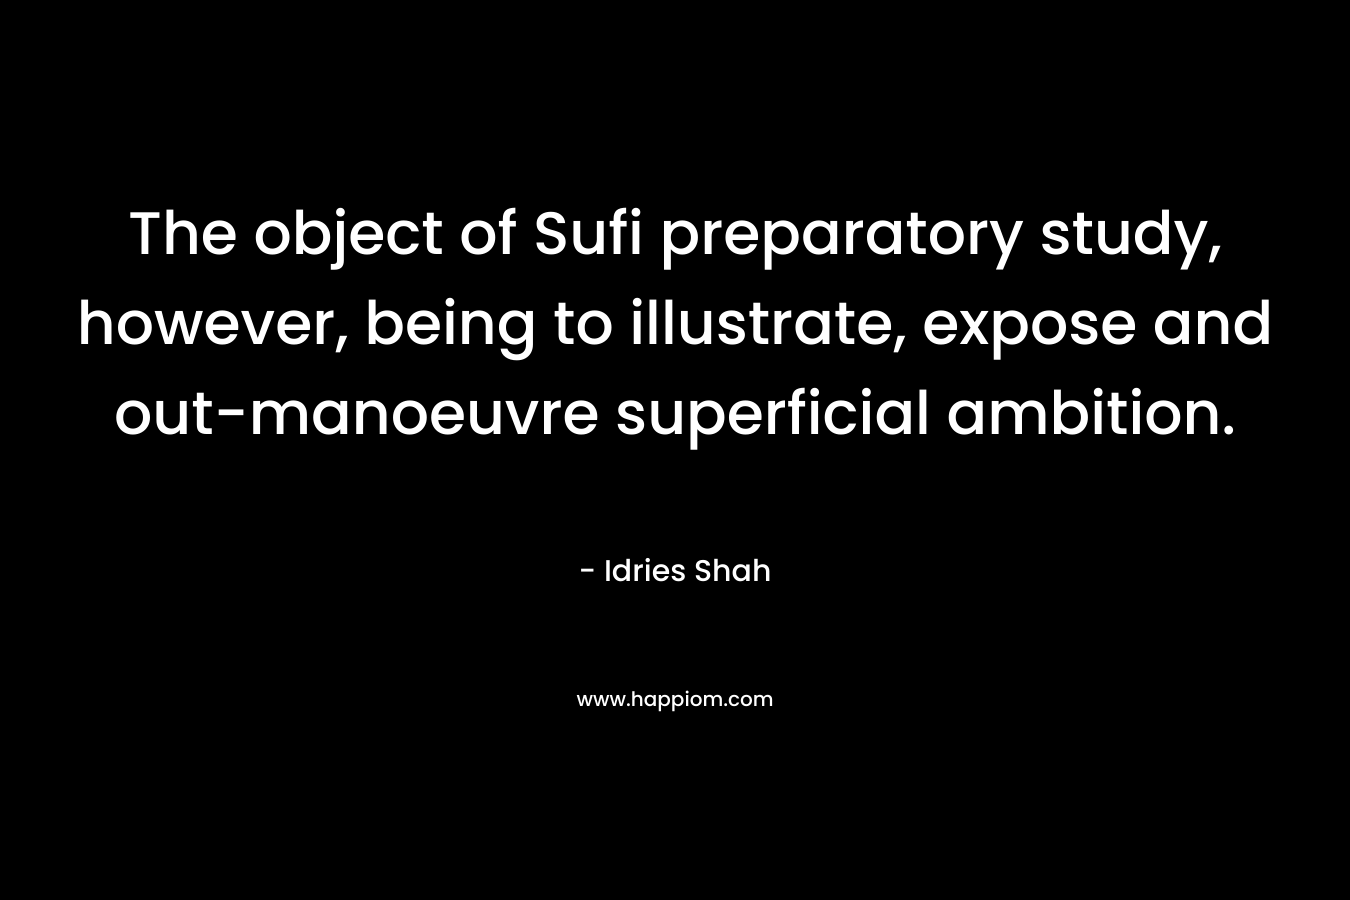 The object of Sufi preparatory study, however, being to illustrate, expose and out-manoeuvre superficial ambition. – Idries Shah